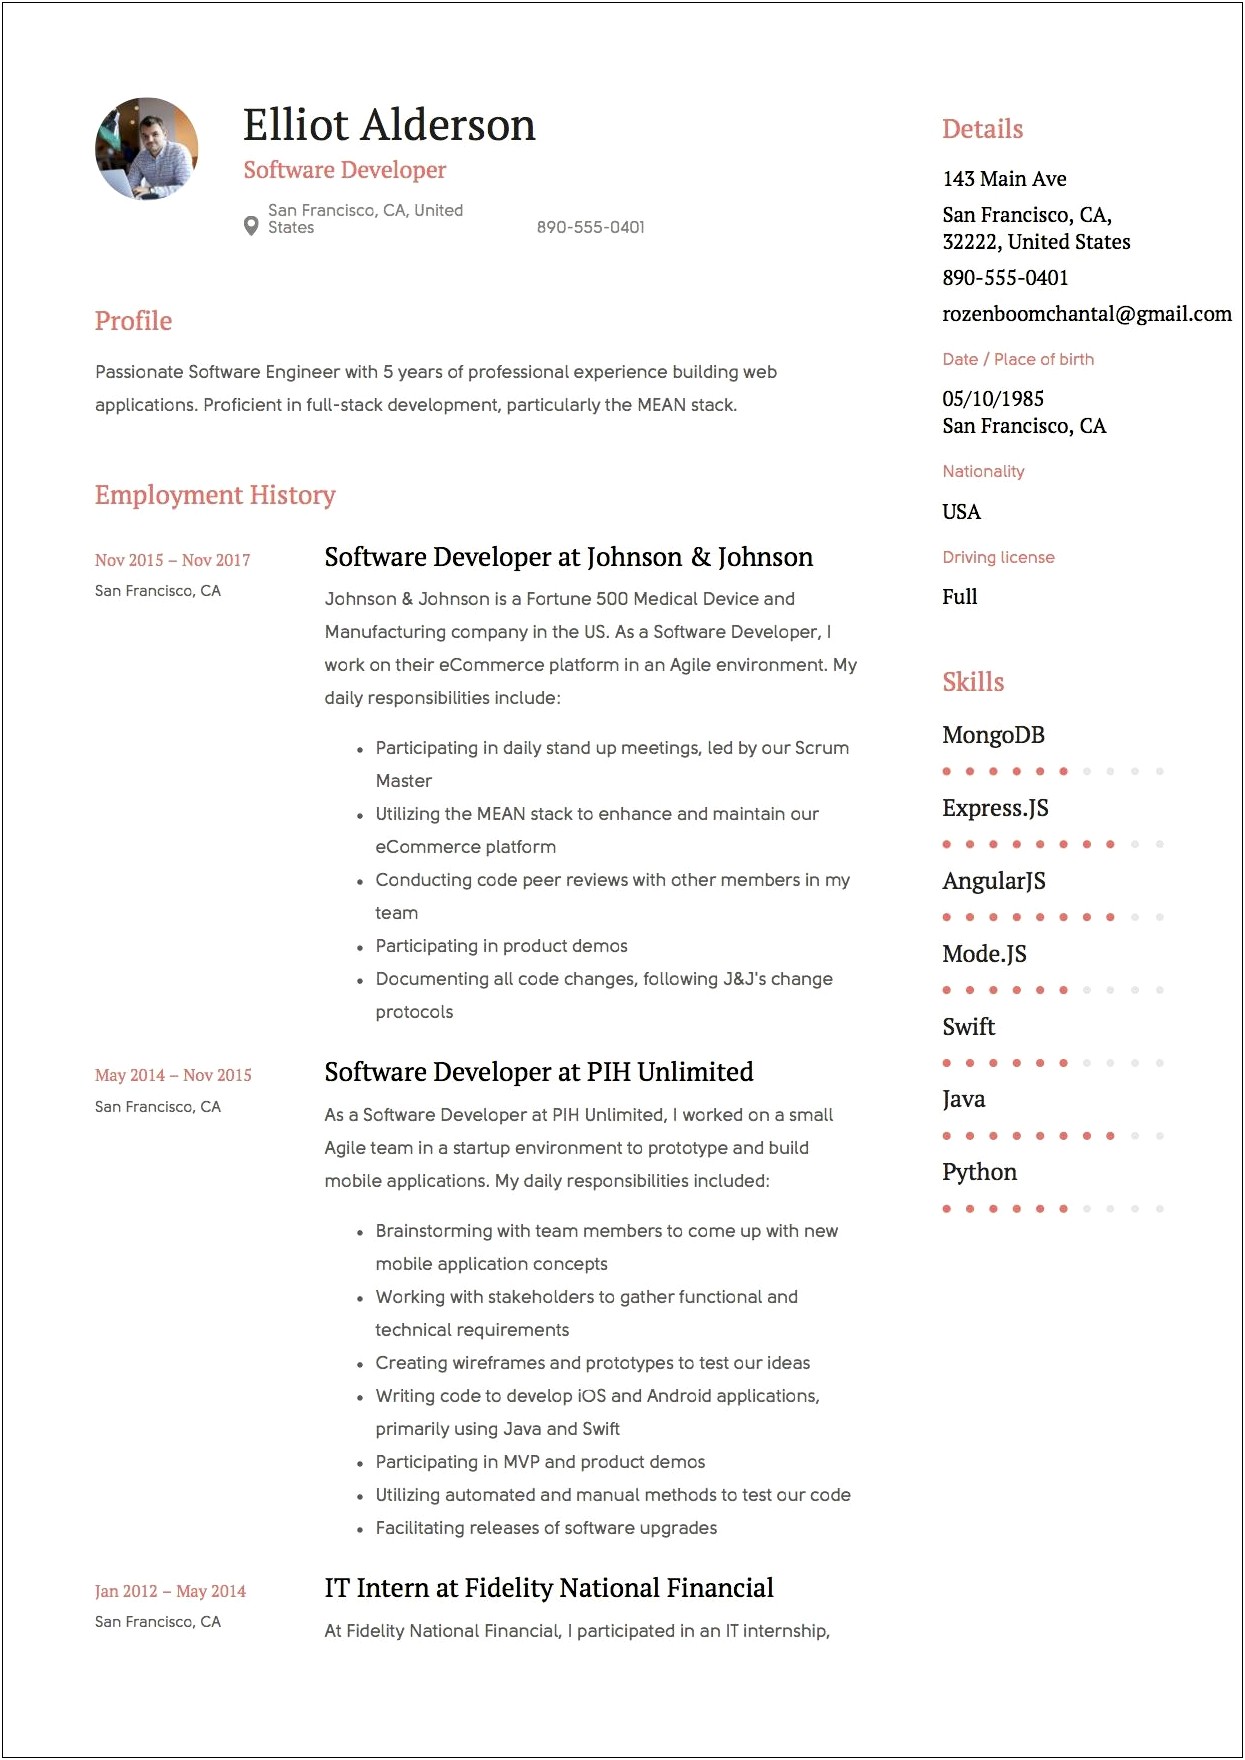 Android Developer Resume Template Free Download